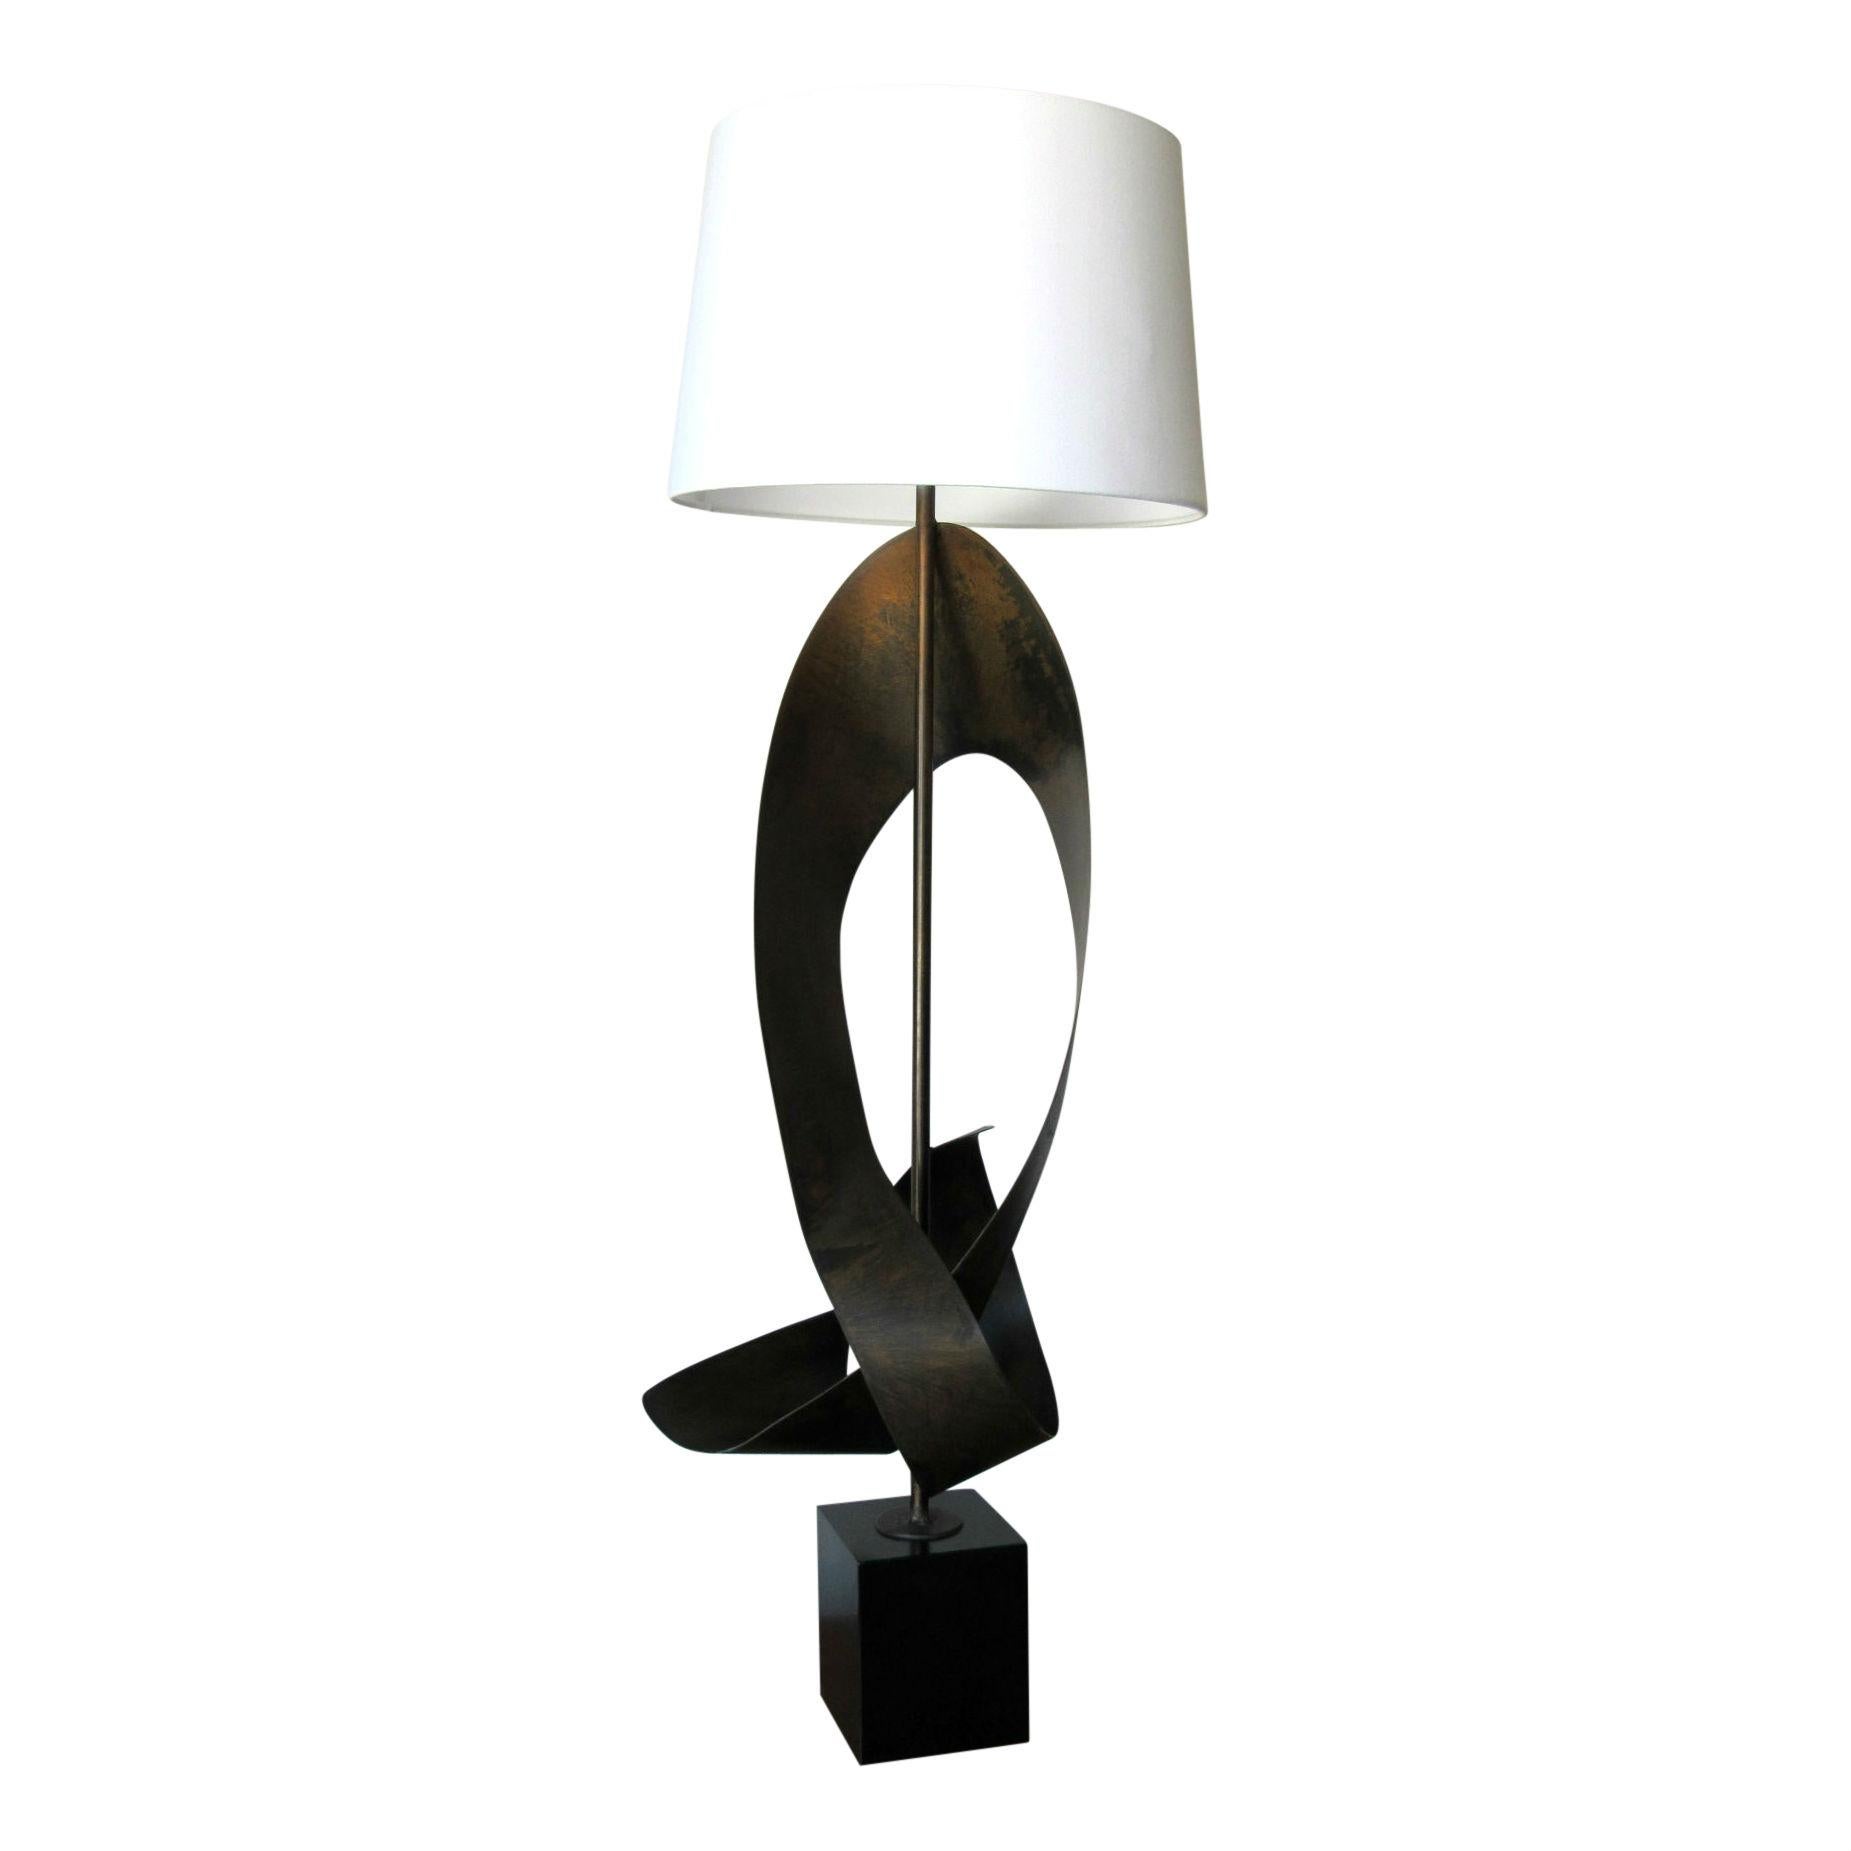 Richard Barr and Harold Weiss for the Laurel Lamp Company, but often wrongly attributed to Harry Balmer, this dramatic lamp features torch cut enameled steel mounted on a black enameled wood base. 
